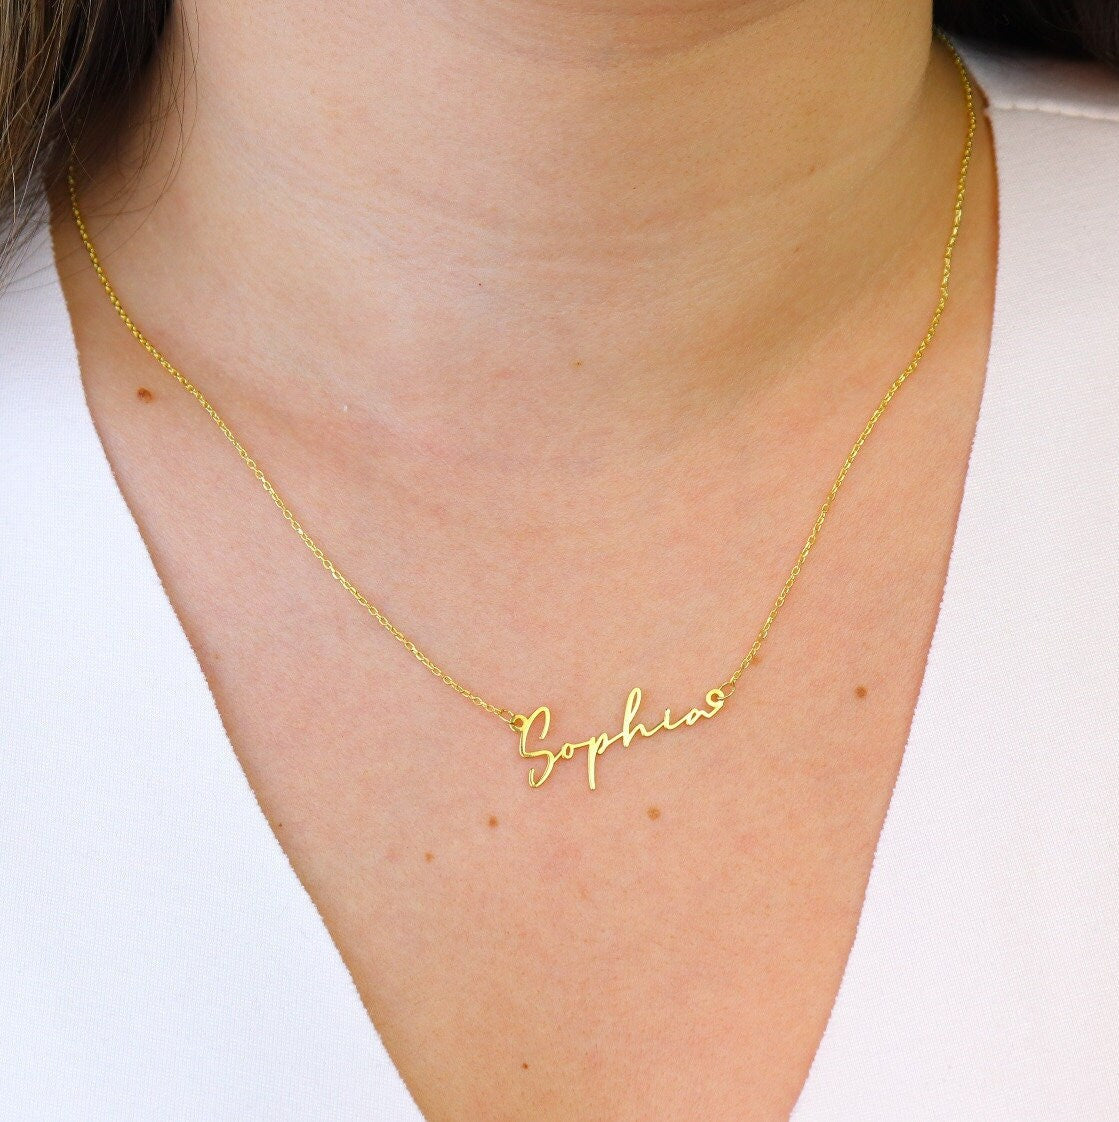 Horizontal 2 Side Name Necklace